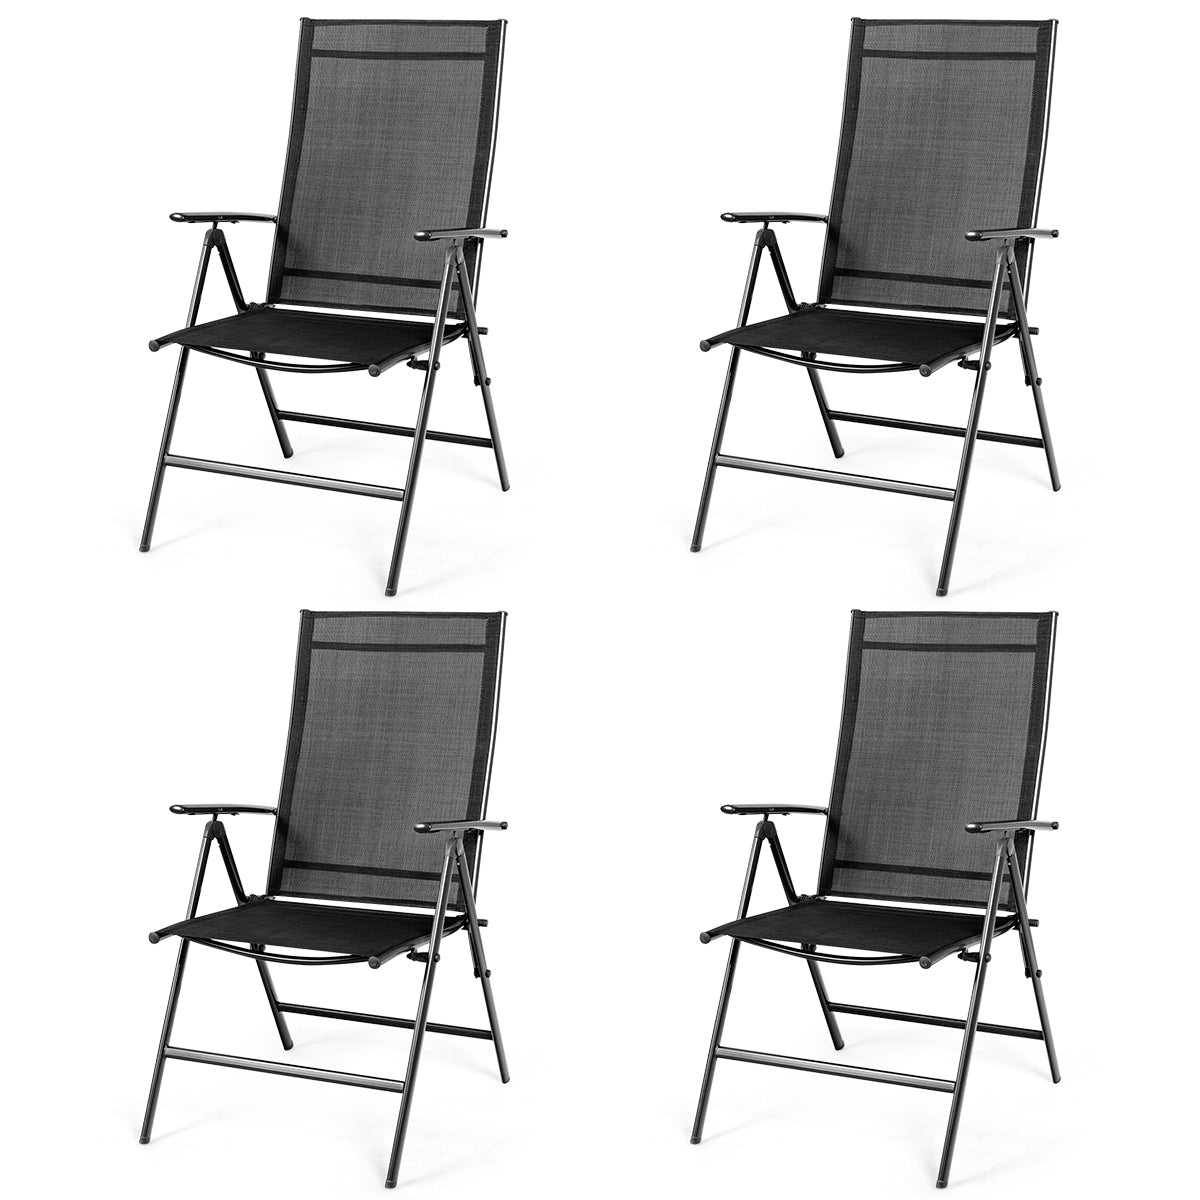 Giantex Set of 2 Patio Dining Chairs, Folding Outdoor Chairs (Black)